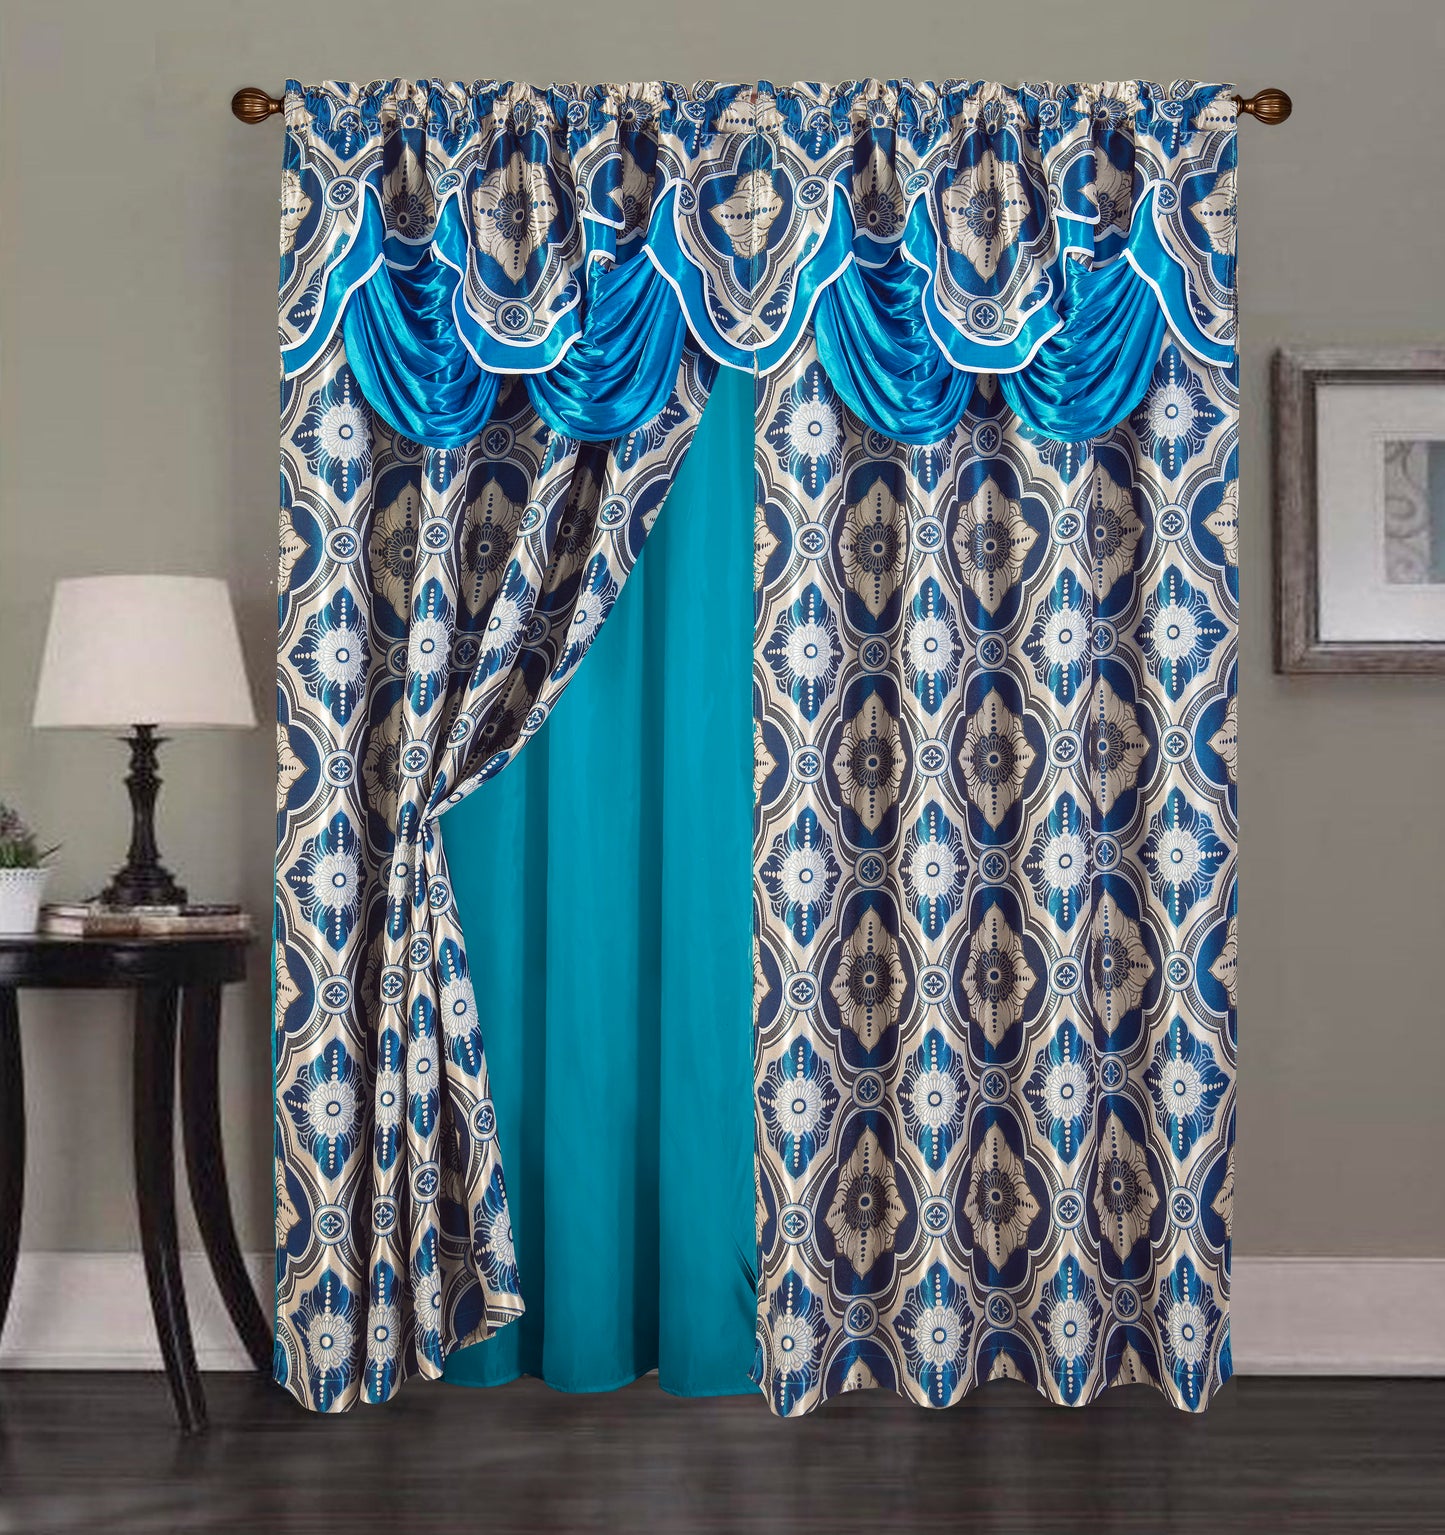 2PC CURTAIN SET W/ ATTACHED VALANCE & BACKING - Hailey